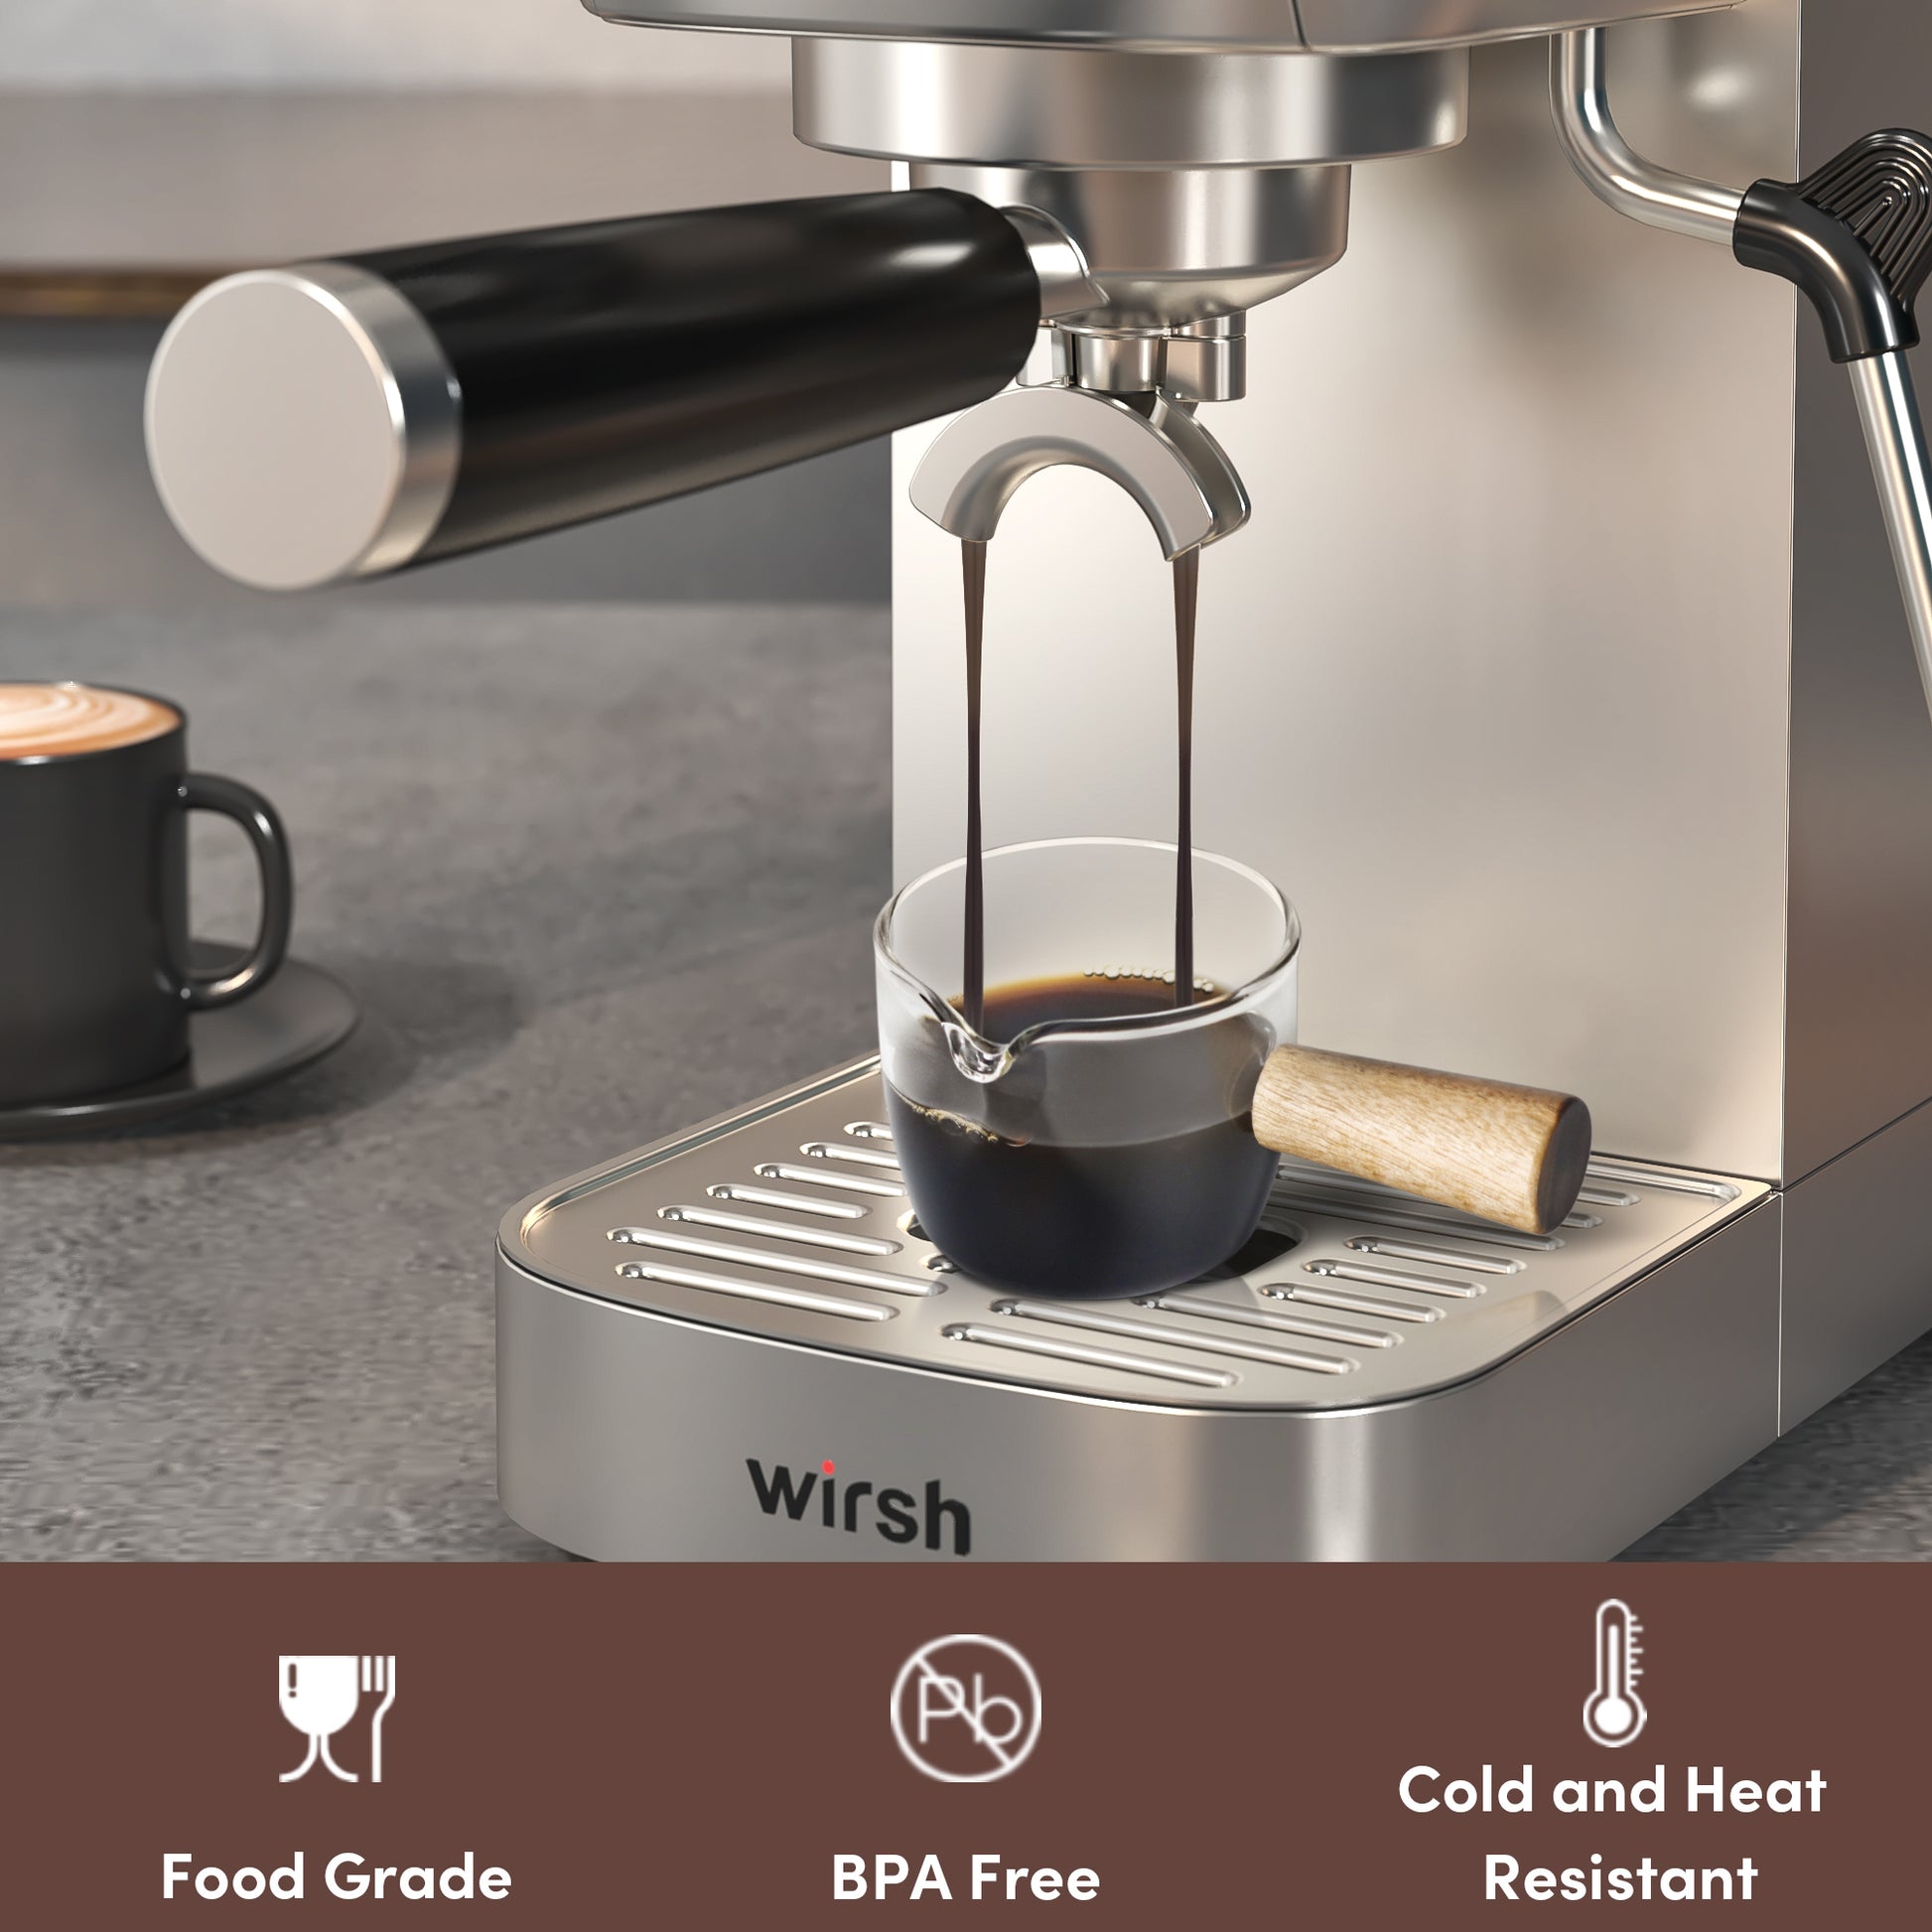 Wirsh Coffee Grinder – with 5.3oz. Stainless Steel Removable Bowl, 200